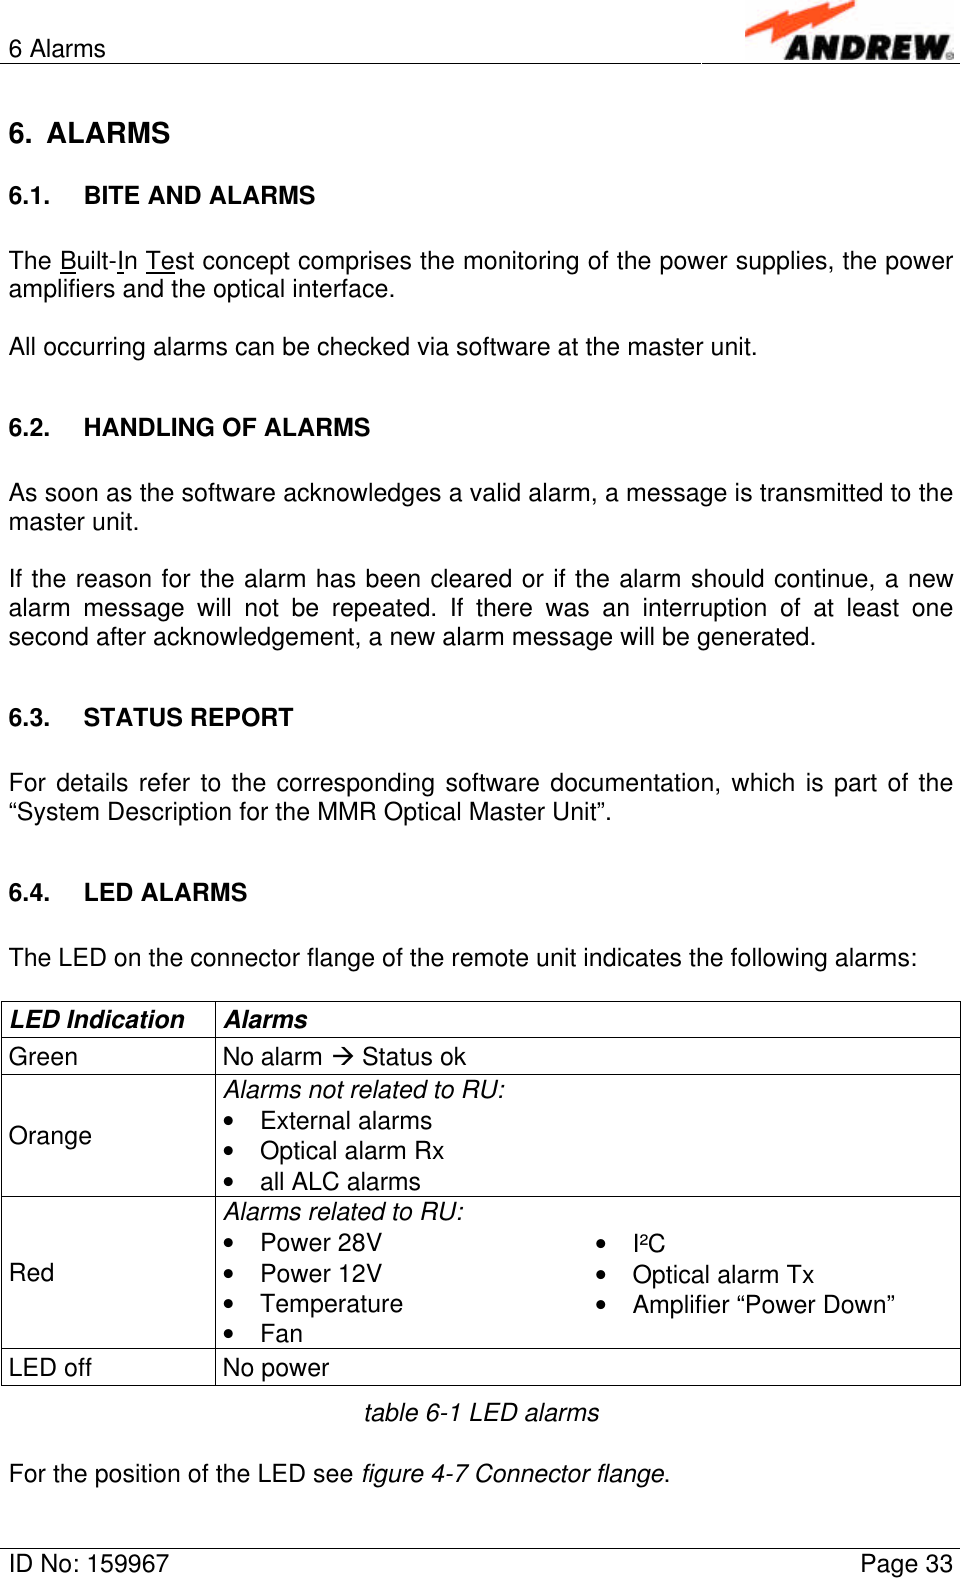 6 AlarmsID No: 159967 Page 336. ALARMS6.1. BITE AND ALARMSThe Built-In Test concept comprises the monitoring of the power supplies, the poweramplifiers and the optical interface.All occurring alarms can be checked via software at the master unit.6.2. HANDLING OF ALARMSAs soon as the software acknowledges a valid alarm, a message is transmitted to themaster unit.If the reason for the alarm has been cleared or if the alarm should continue, a newalarm message will not be repeated. If there was an interruption of at least onesecond after acknowledgement, a new alarm message will be generated.6.3. STATUS REPORTFor details refer to the corresponding software documentation, which is part of the“System Description for the MMR Optical Master Unit”.6.4. LED ALARMSThe LED on the connector flange of the remote unit indicates the following alarms:LED Indication AlarmsGreen No alarm à Status okAlarms not related to RU:Orange • External alarms• Optical alarm Rx• all ALC alarmsAlarms related to RU:Red • Power 28V• Power 12V• Temperature• Fan• I²C• Optical alarm Tx• Amplifier “Power Down”LED off No powertable 6-1 LED alarmsFor the position of the LED see figure 4-7 Connector flange.